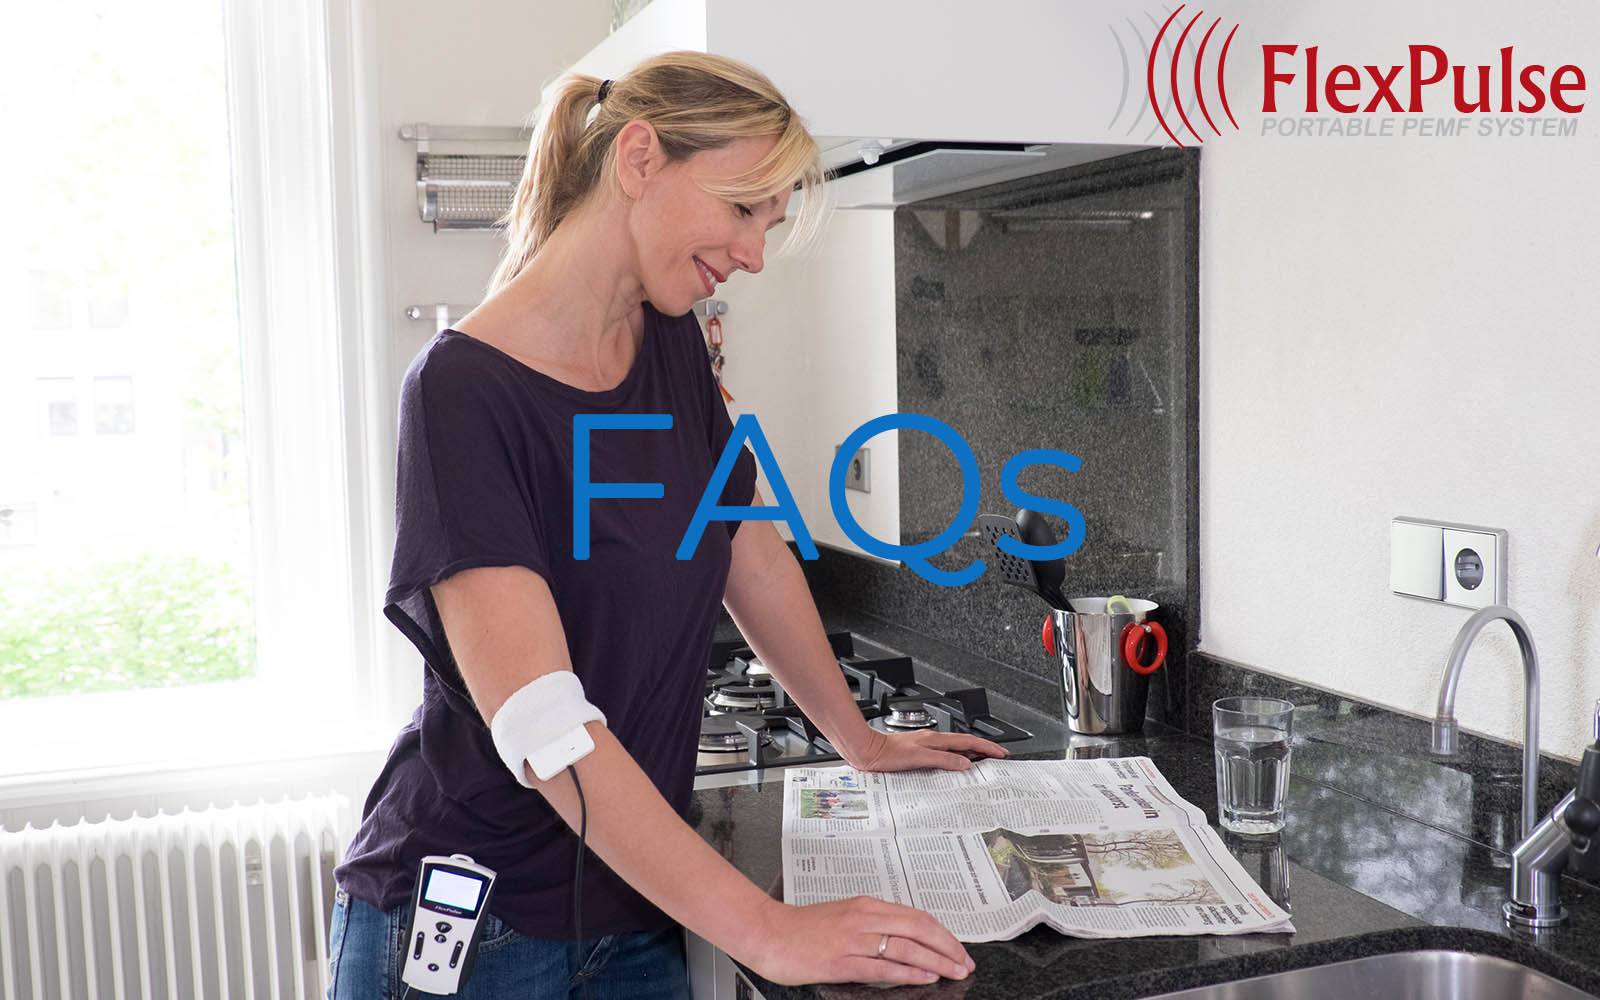 PEMF DEVICE FAQs - Frequently asked Questions about PEMF therapy devices by FlexPulse